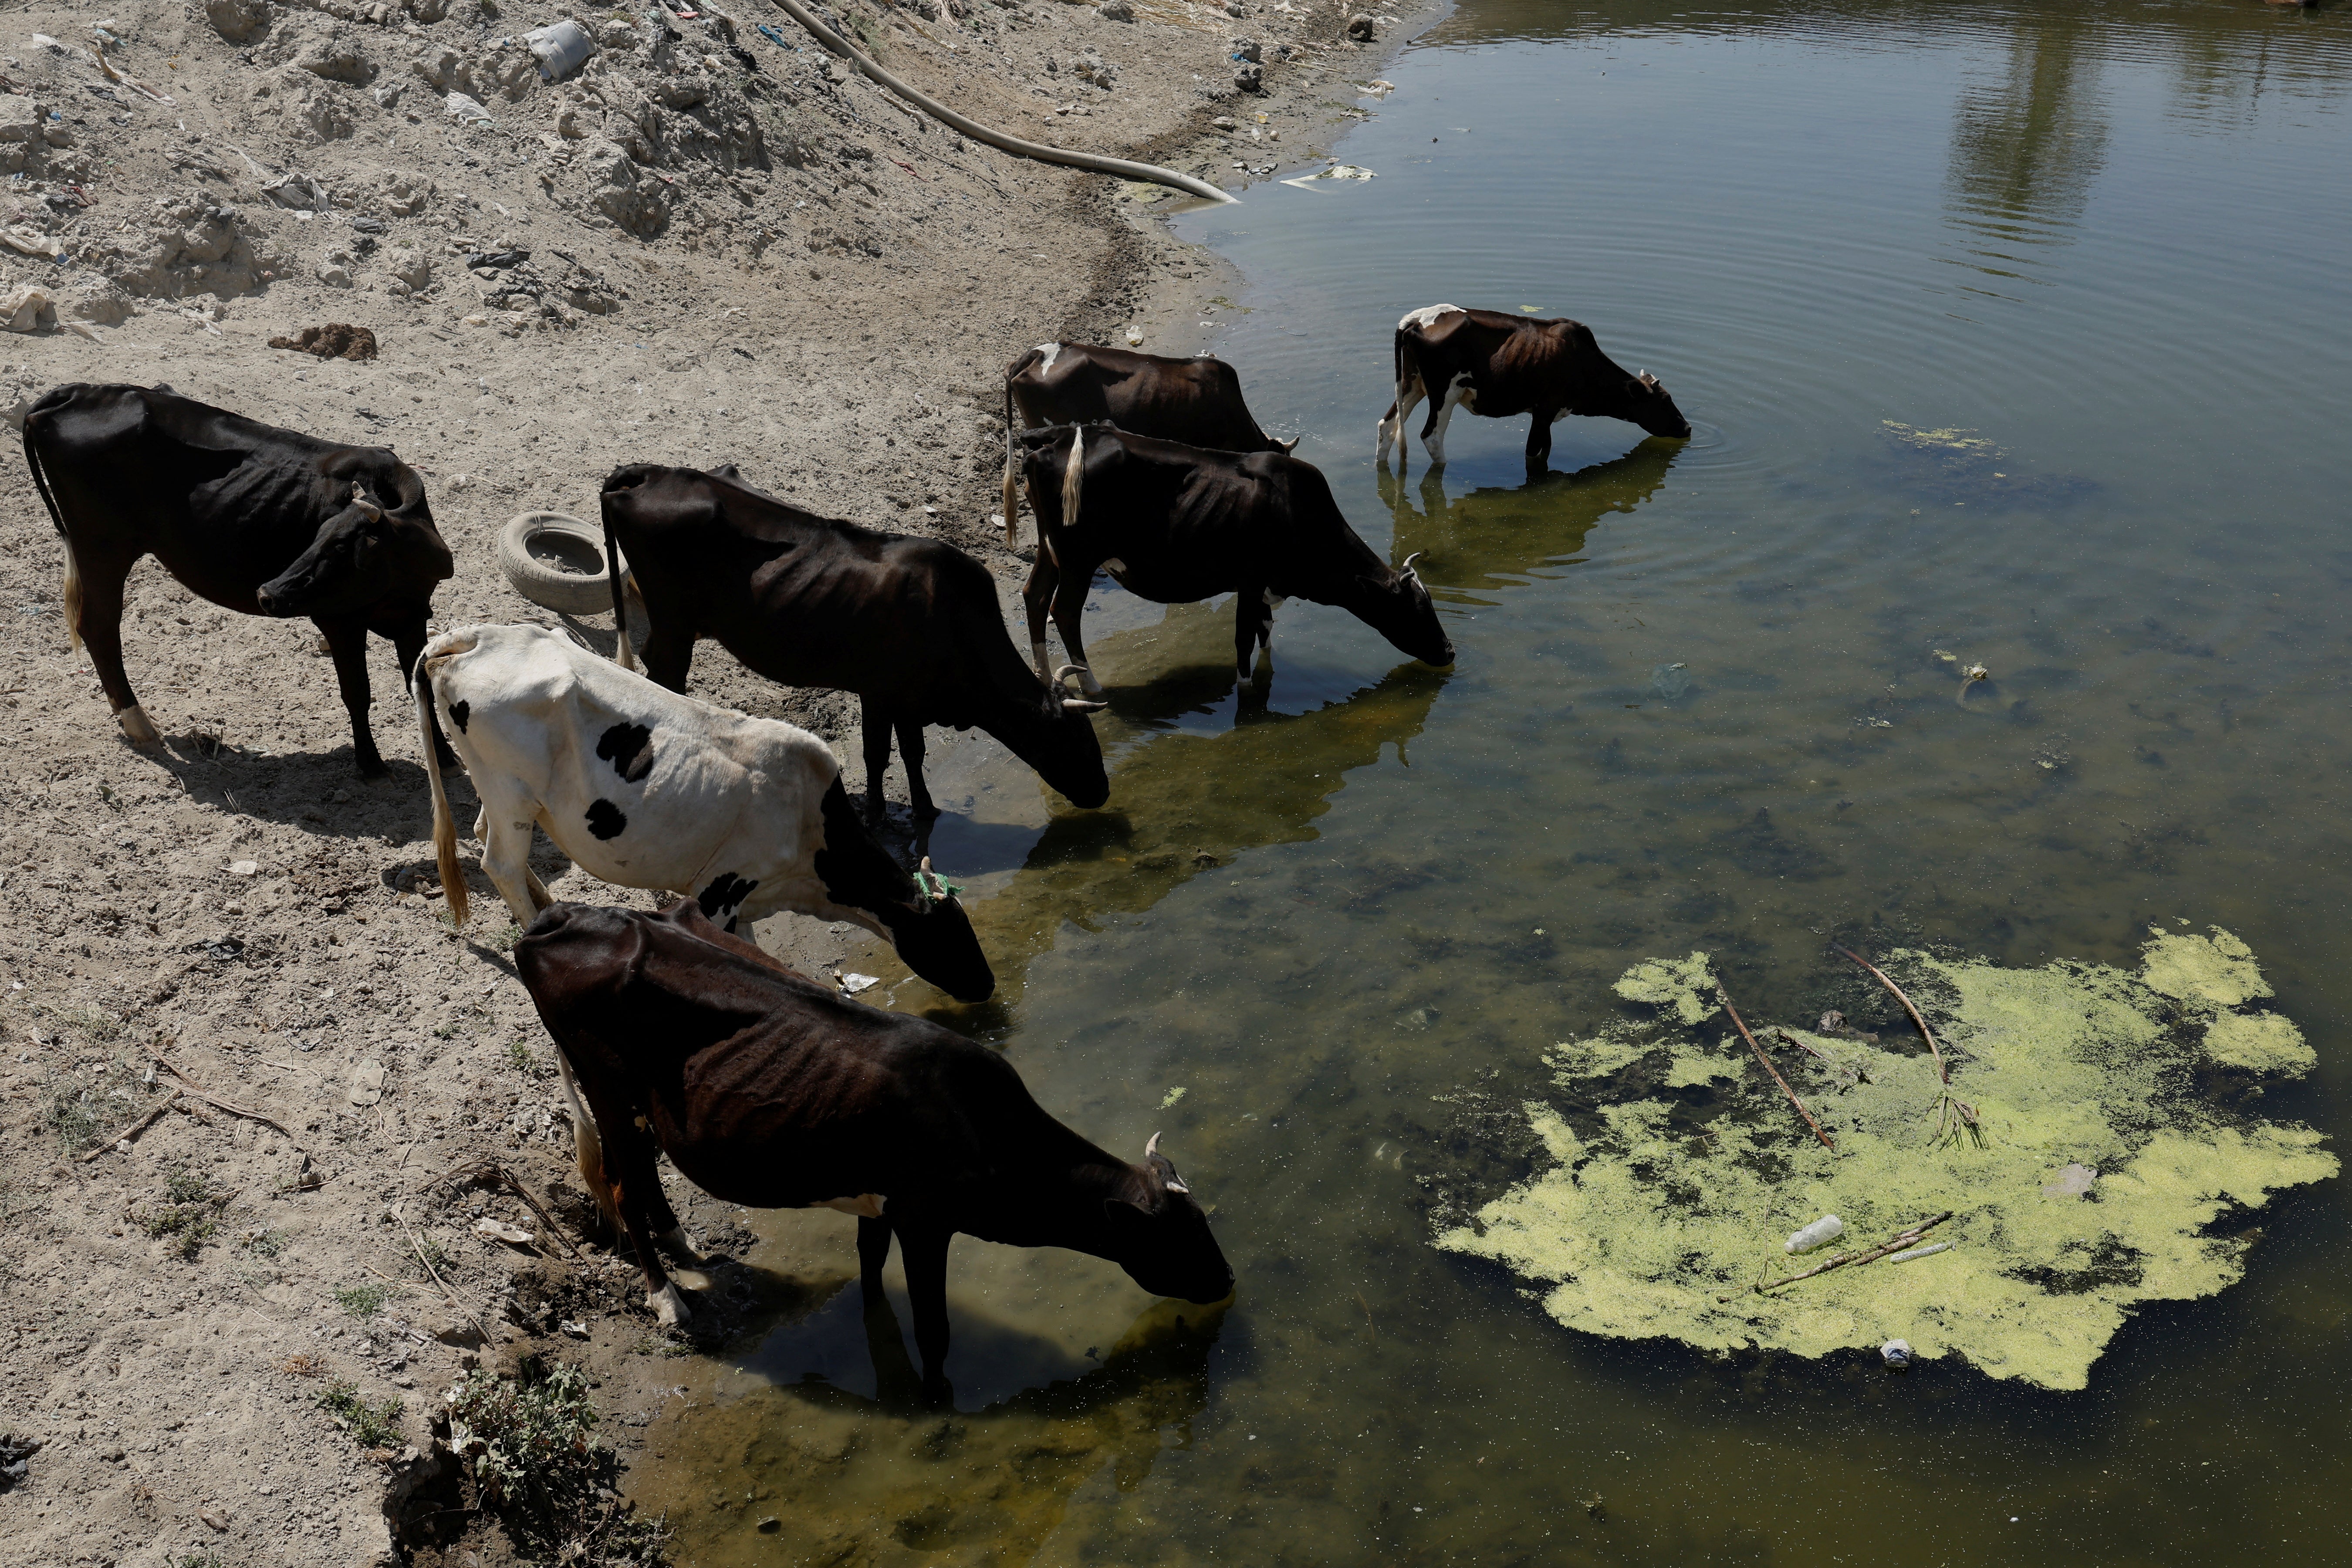 Buffalo drink water from the almost dry Al-Shallal river